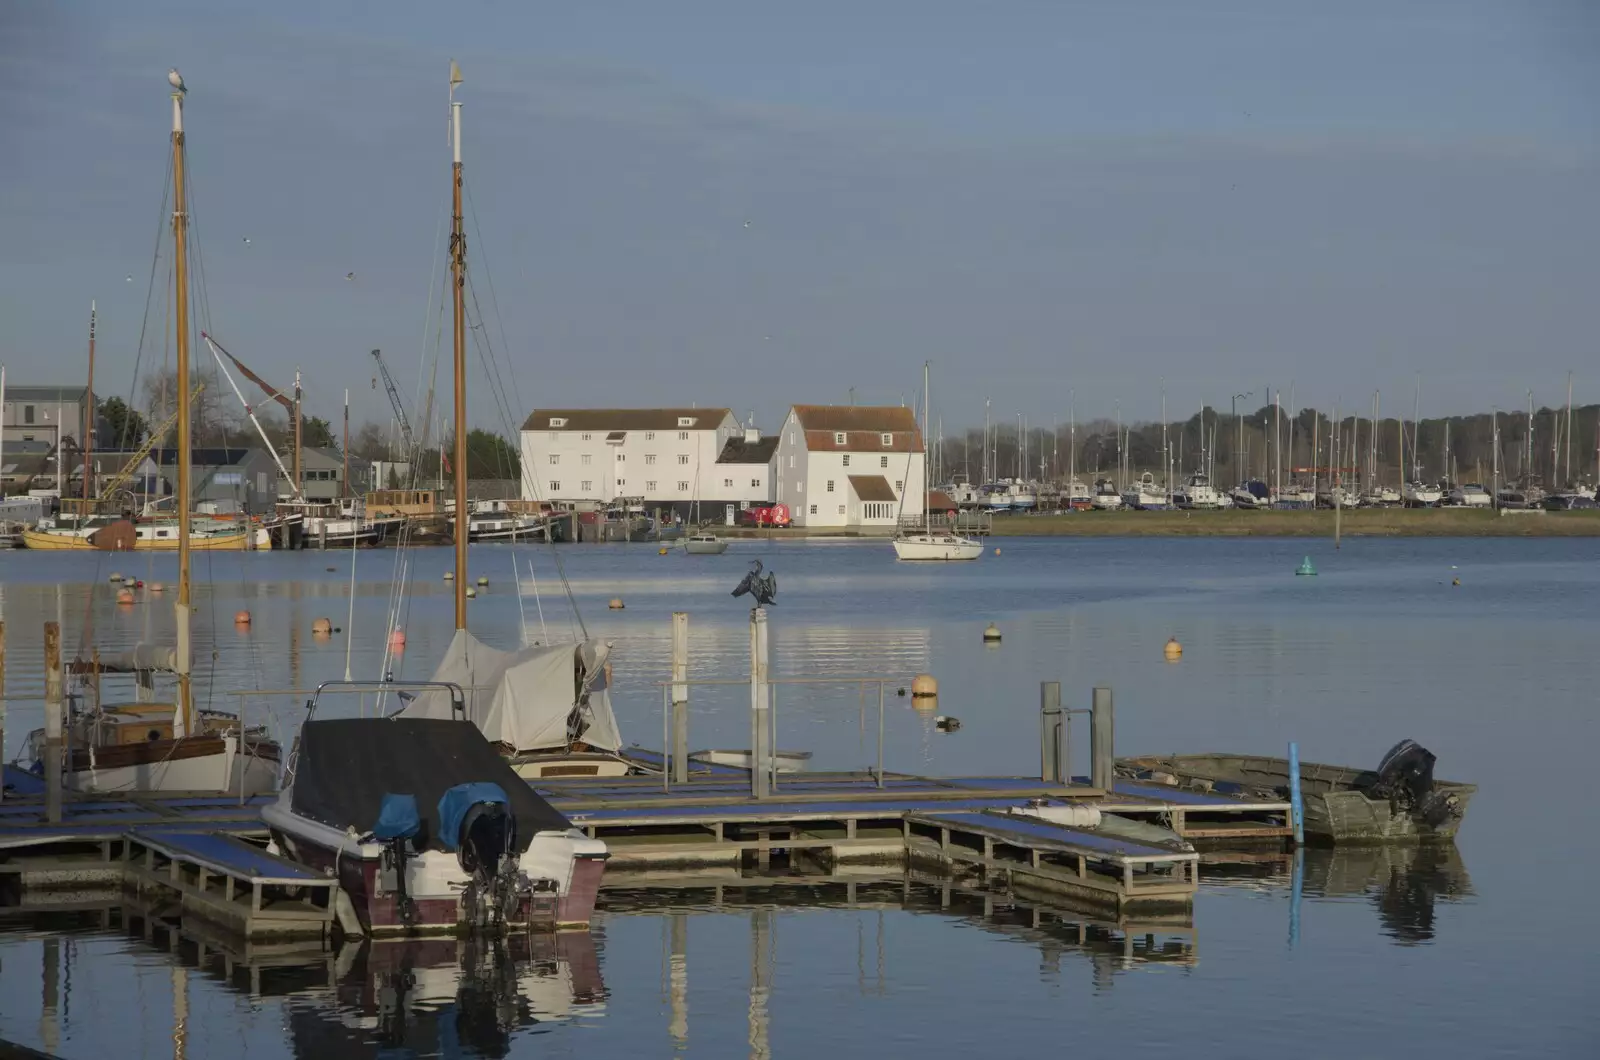 The Tide Mill from across the marina, from A February Miscellany, Diss and Woodbridge, Suffolk - 3rd February 2024